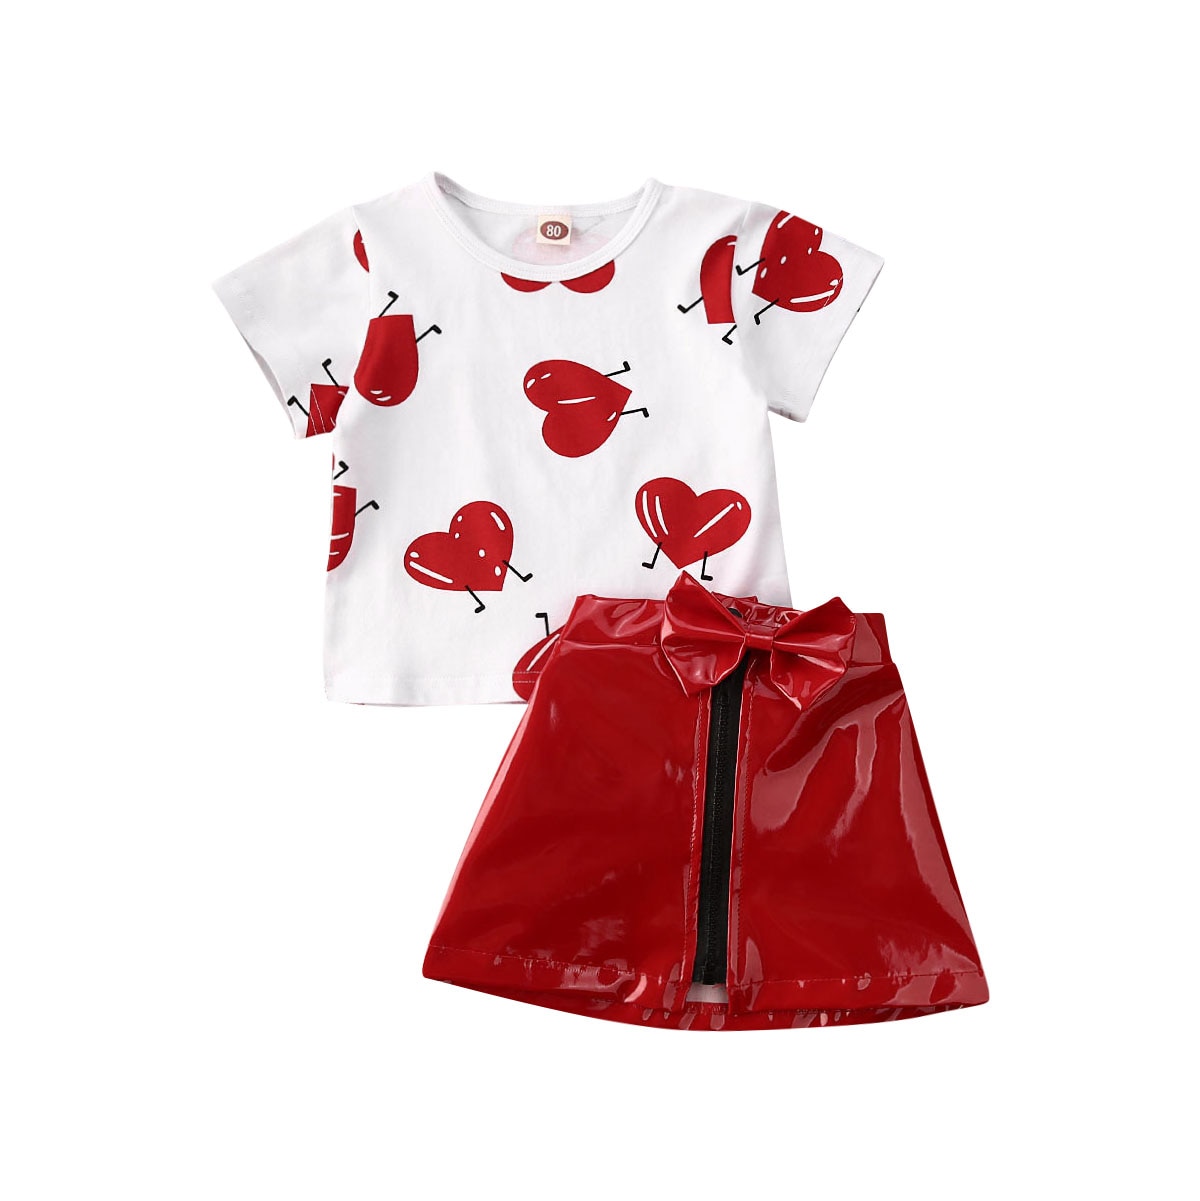 Kids Baby Girls Clothes Set Valentines Day Outfit 6M-5Y